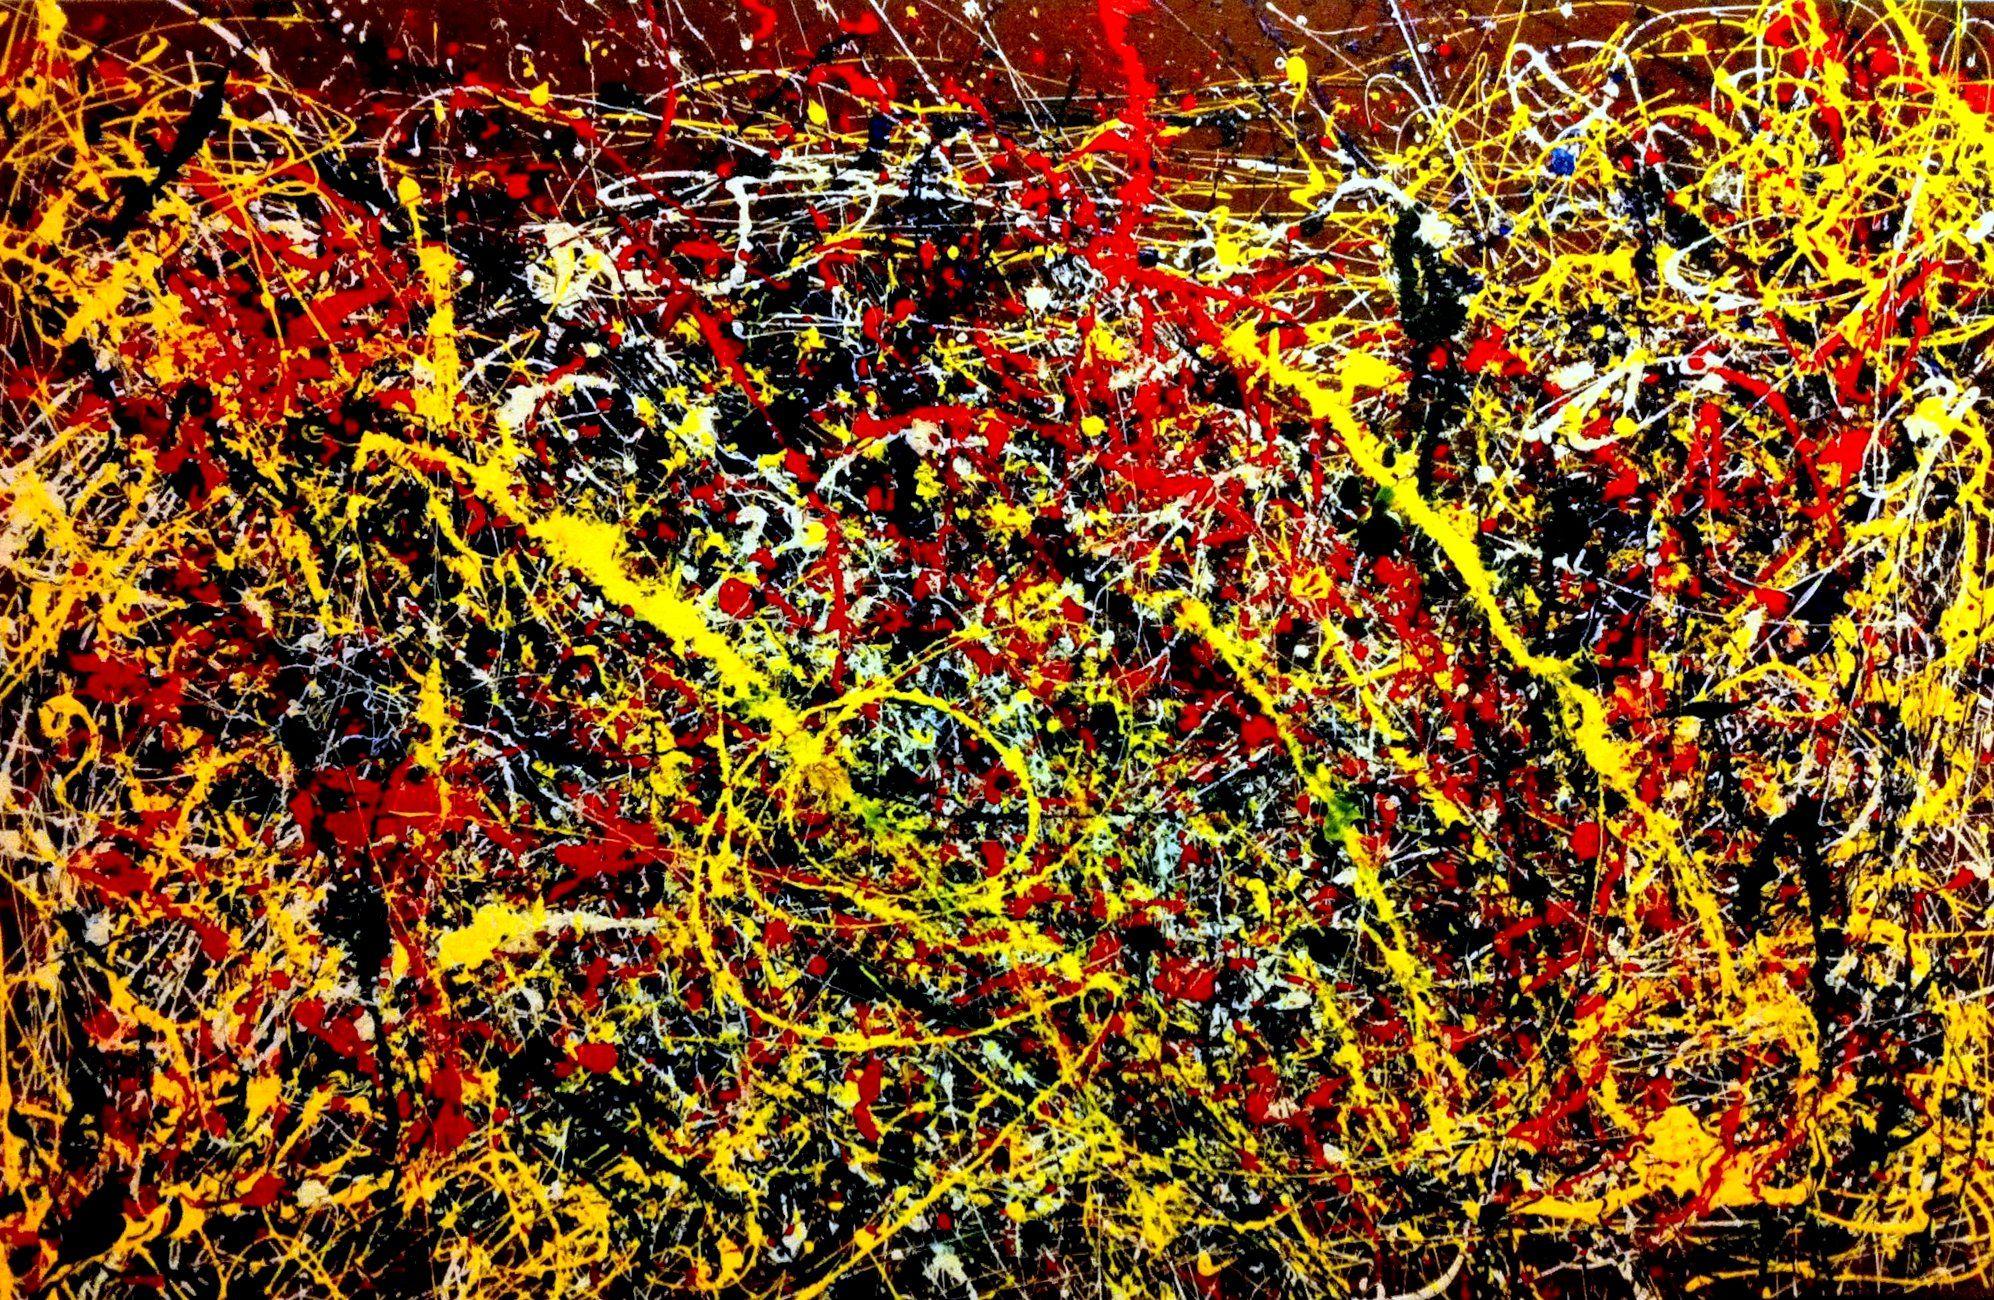 Jackson Pollock is an amazing artist. But he isn't great at cable